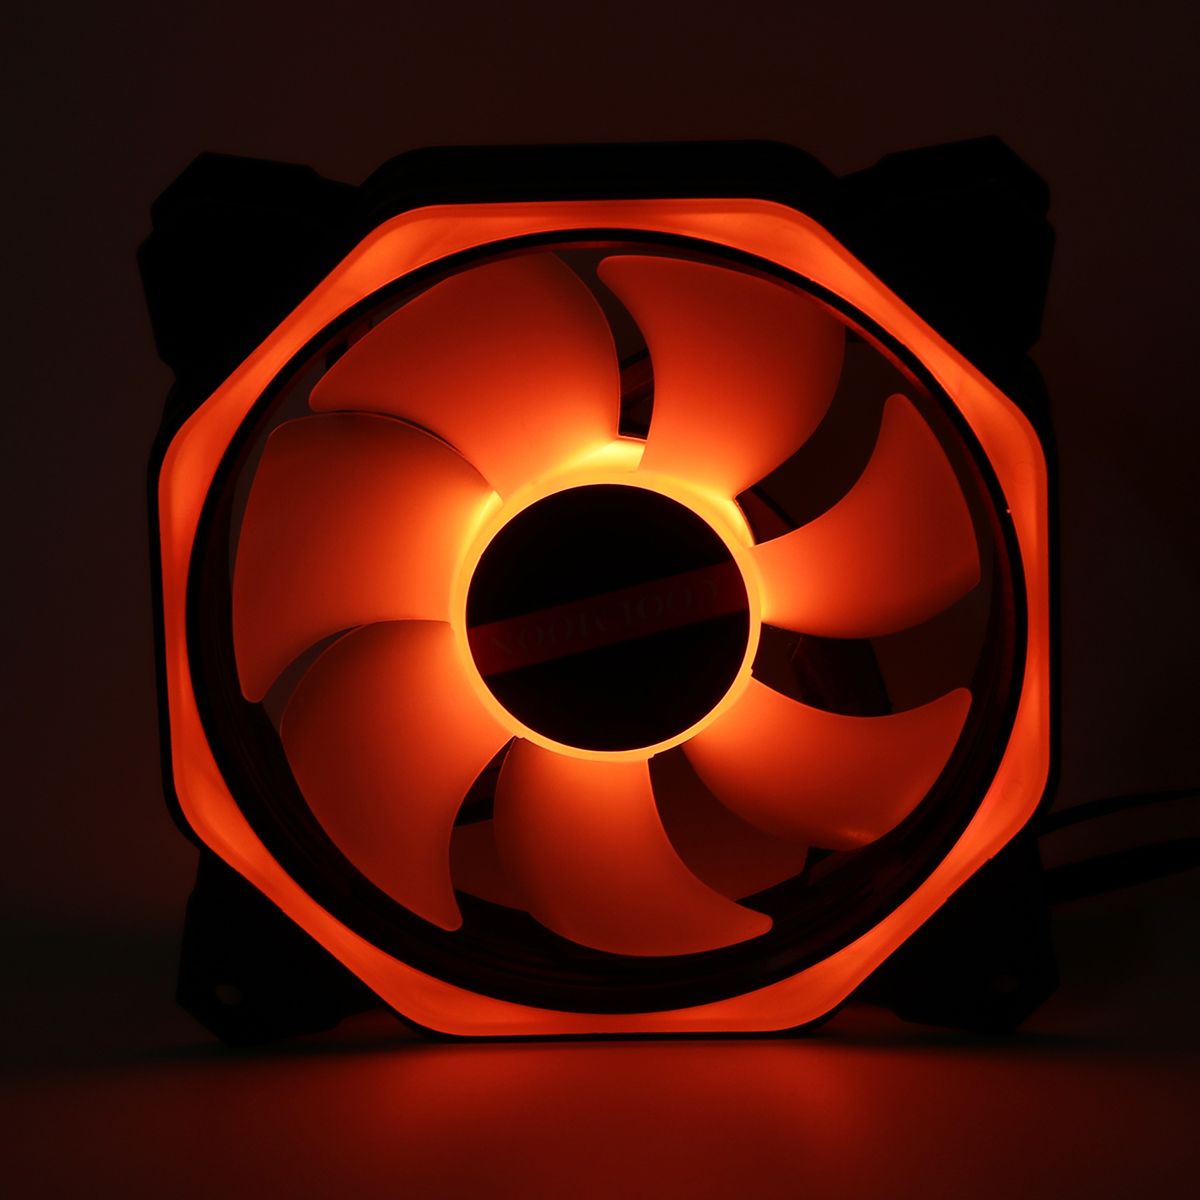 12CM-3-Pin-1-Fan-12-Modes-Adjustable-Colorful-RGB-LED-Silent-Computer-Case-Cooling-Fan-1572823